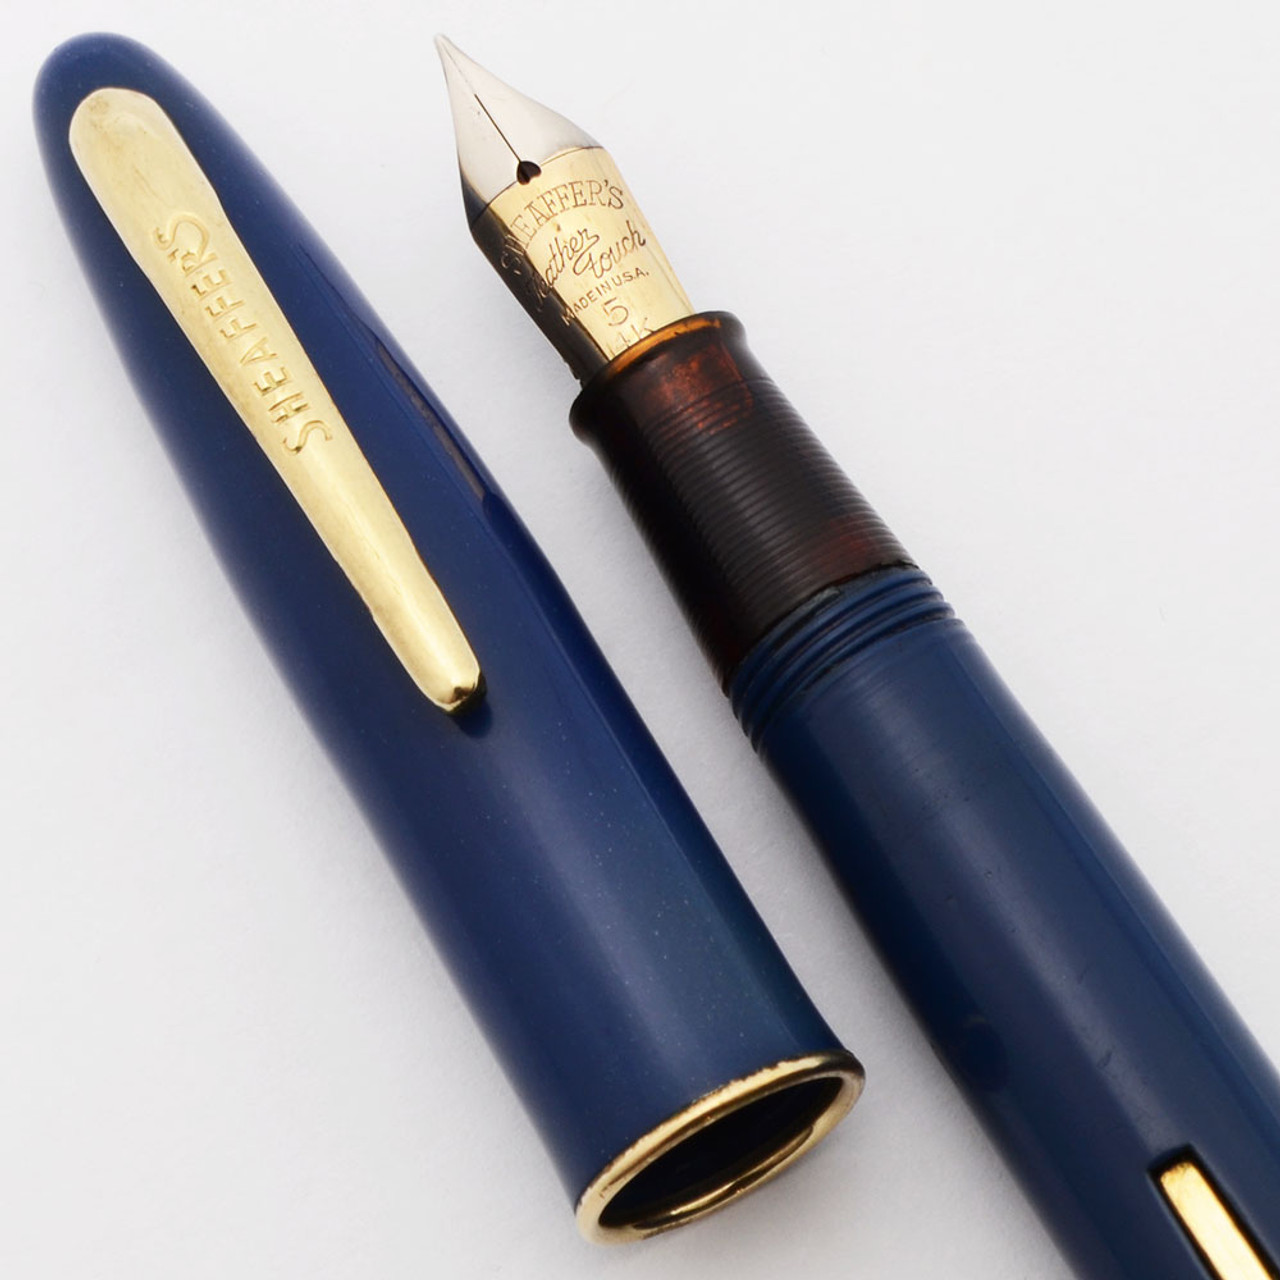 Sheaffer Craftsman (1940s) - Blue w GT, Lever Filler, Fine Feather Touch #5 Nib  (Very Nice, Restored)